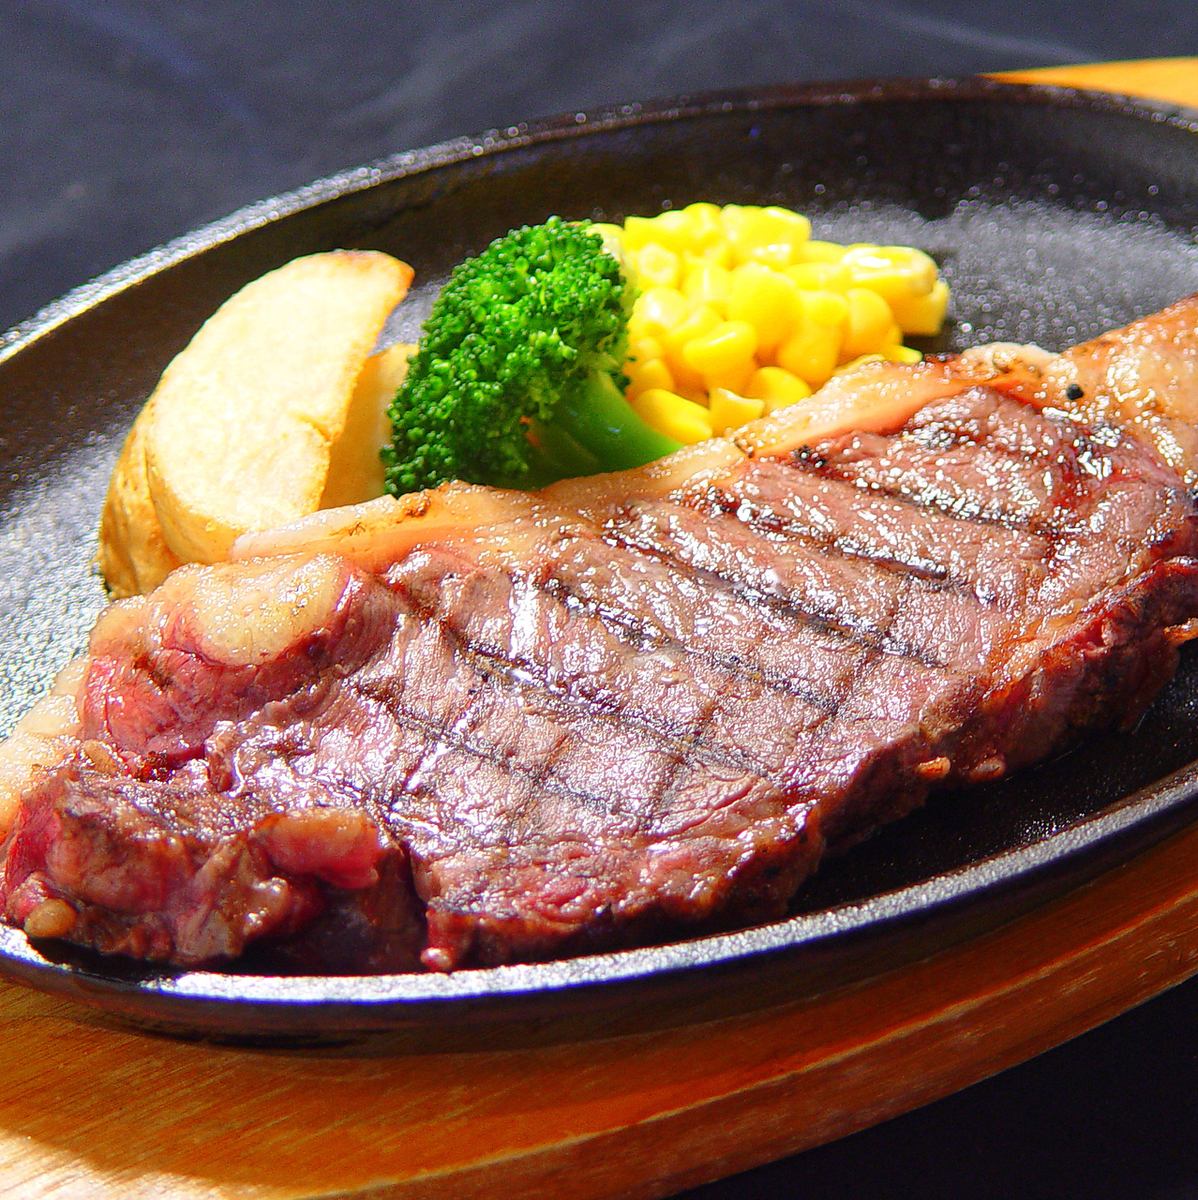 <3/19 Fri OPEN> Delicious meat anytime, anywhere !! Queen of Meat's